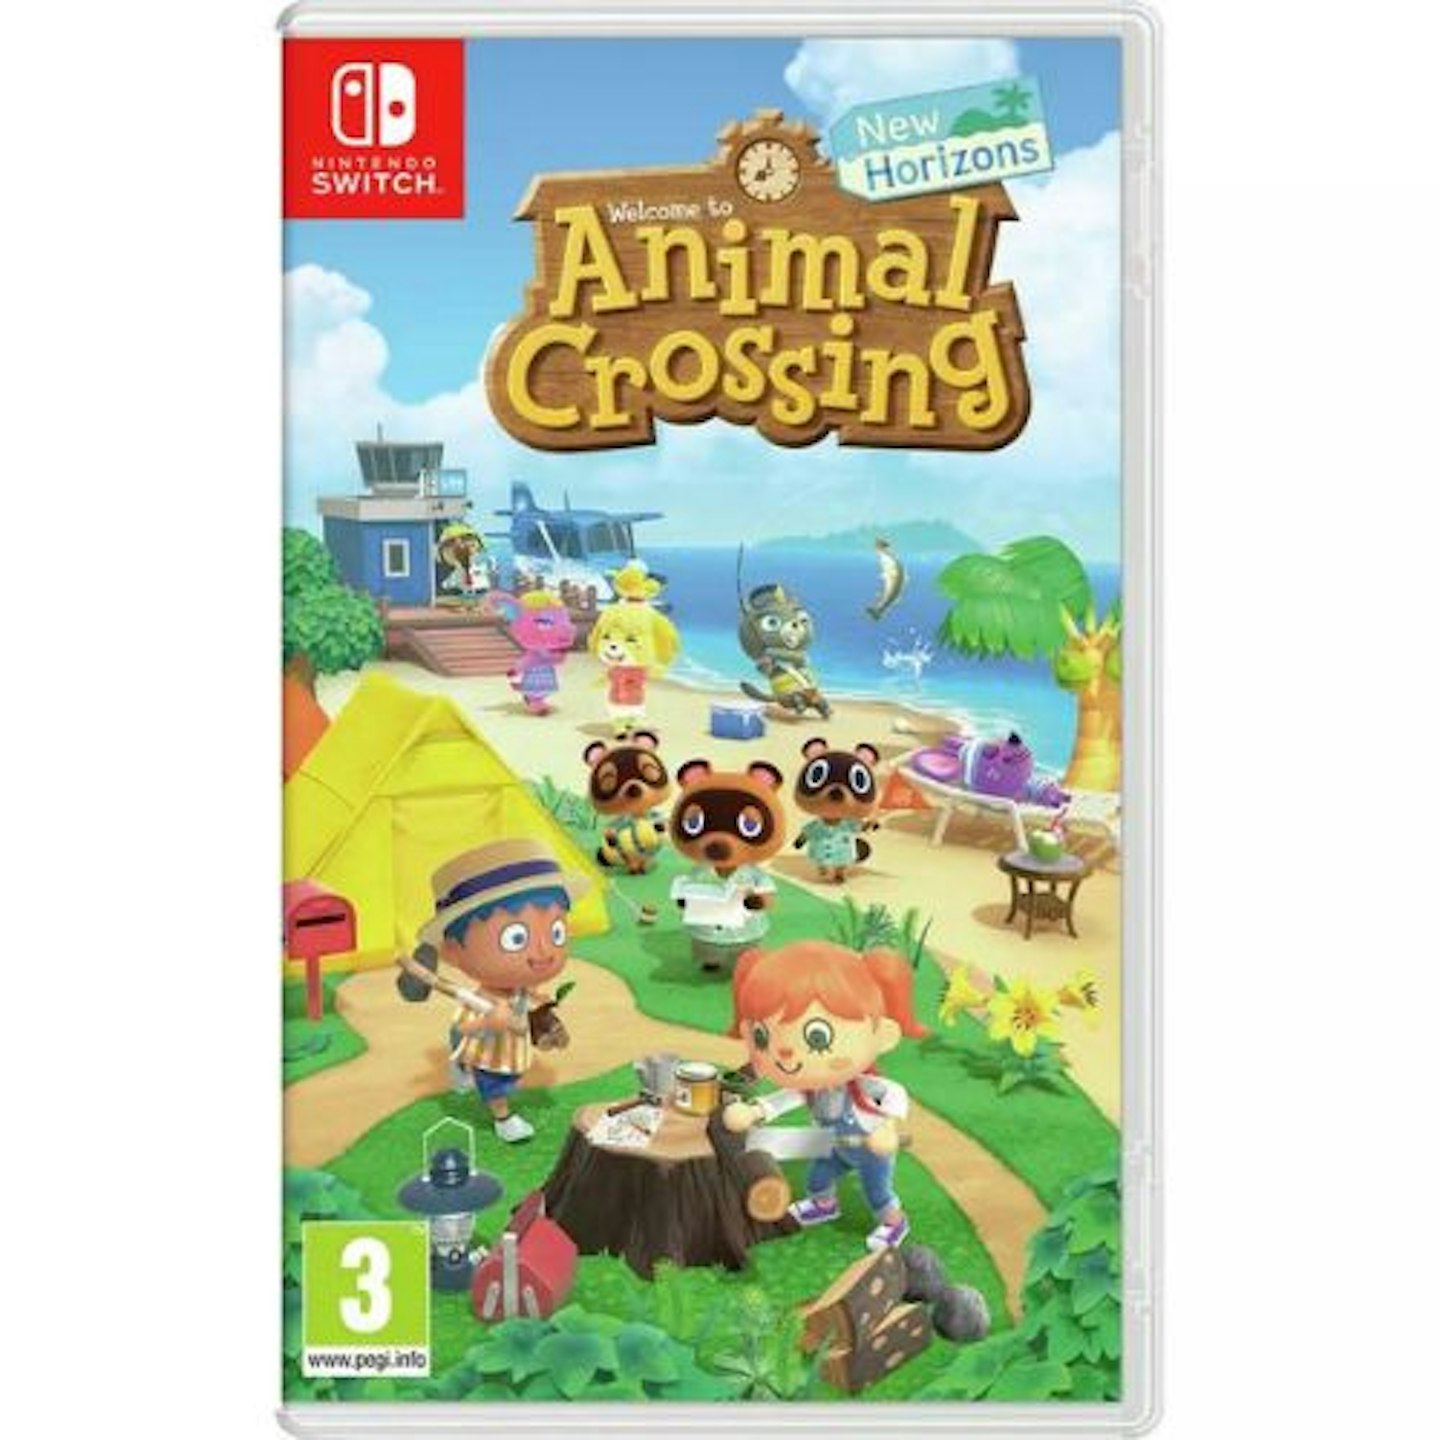 Best kid friendly switch games Animal Crossing: New Horizons